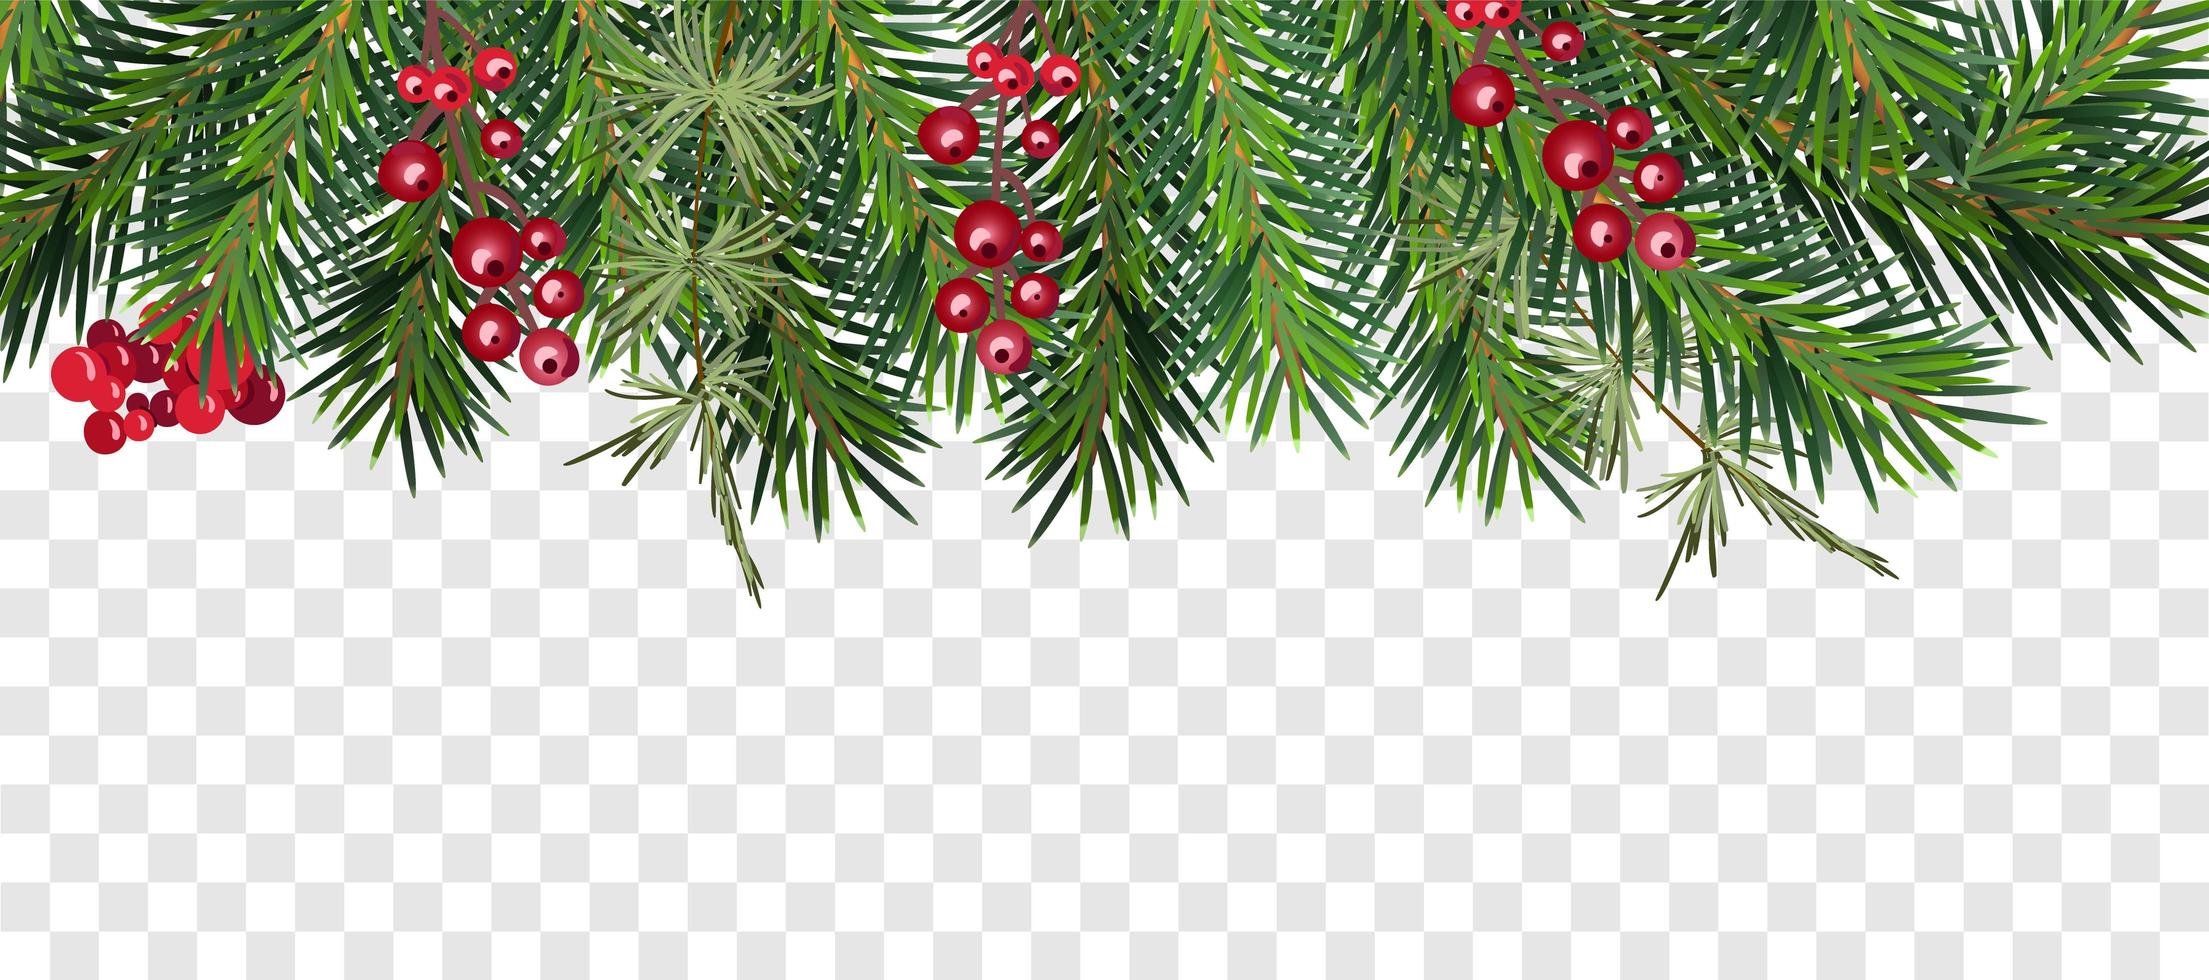 Christmas tree garland and berries top frame vector